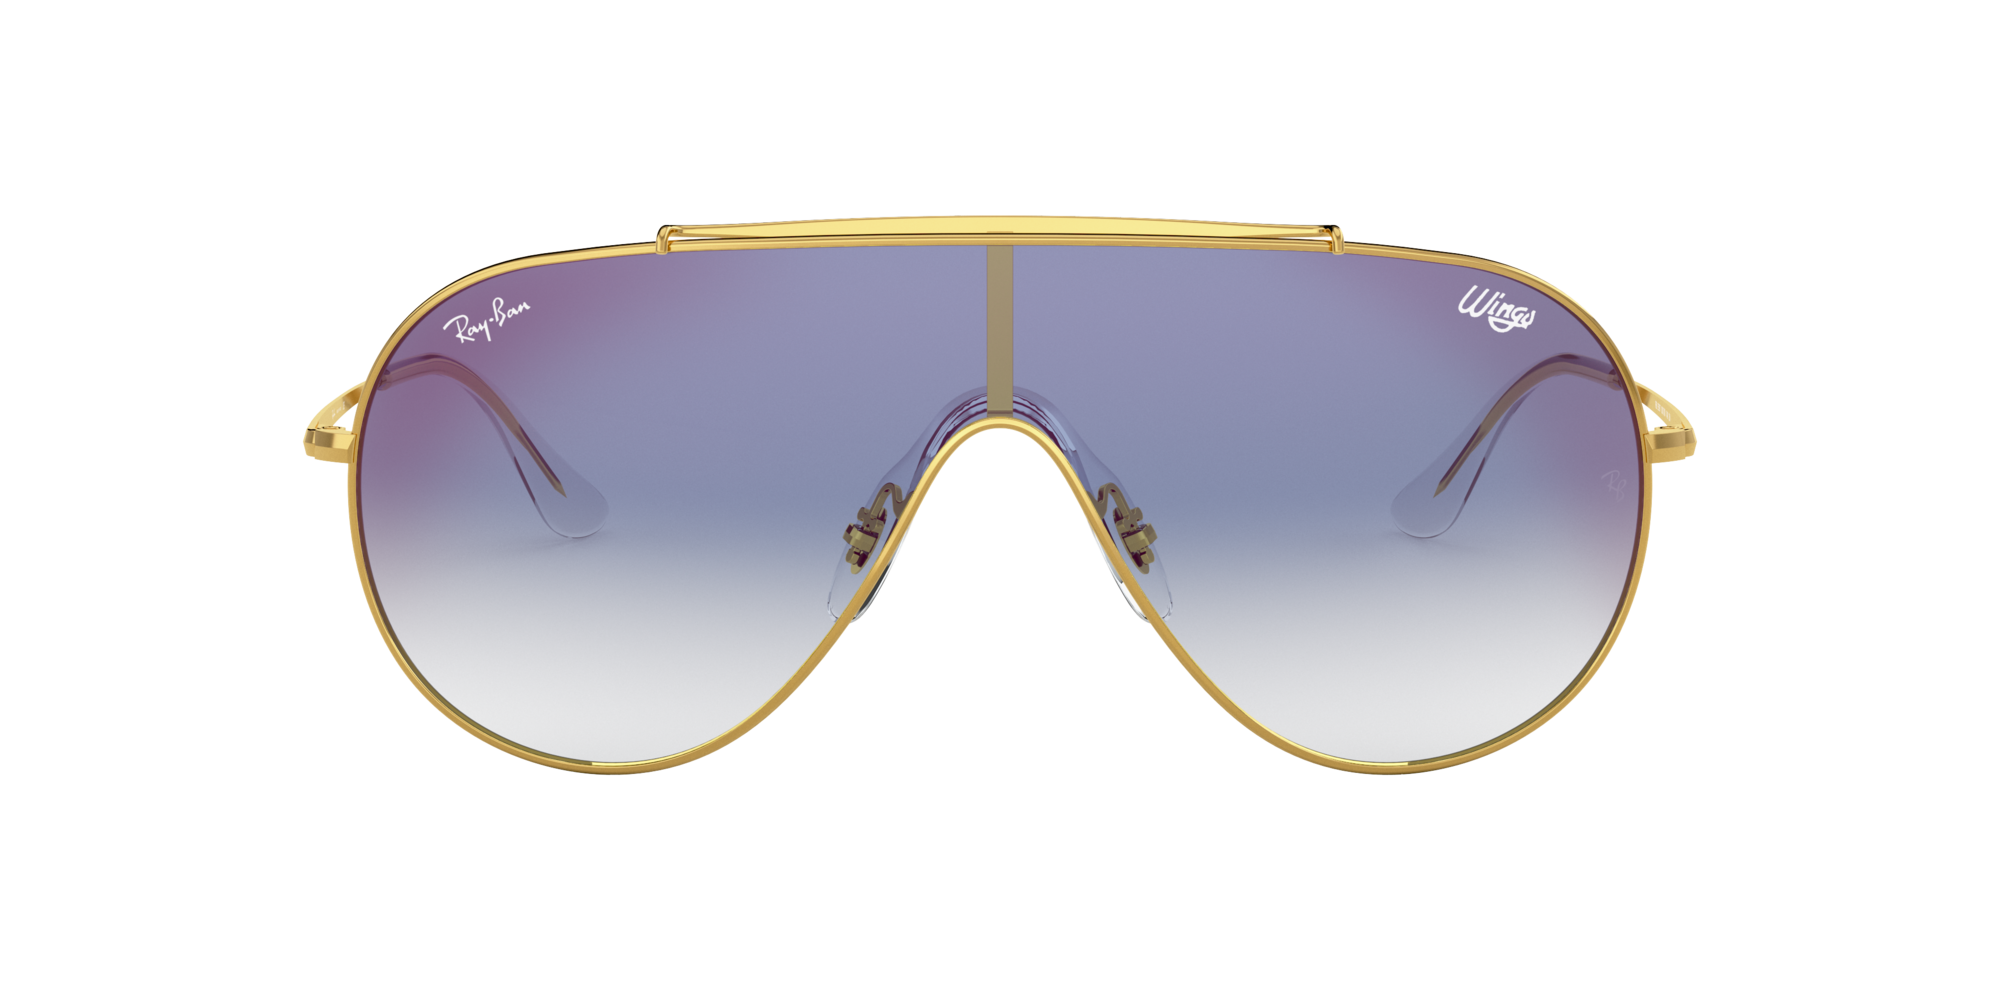 Ray-Ban RB3597 WINGS 01 Blue Gradient 